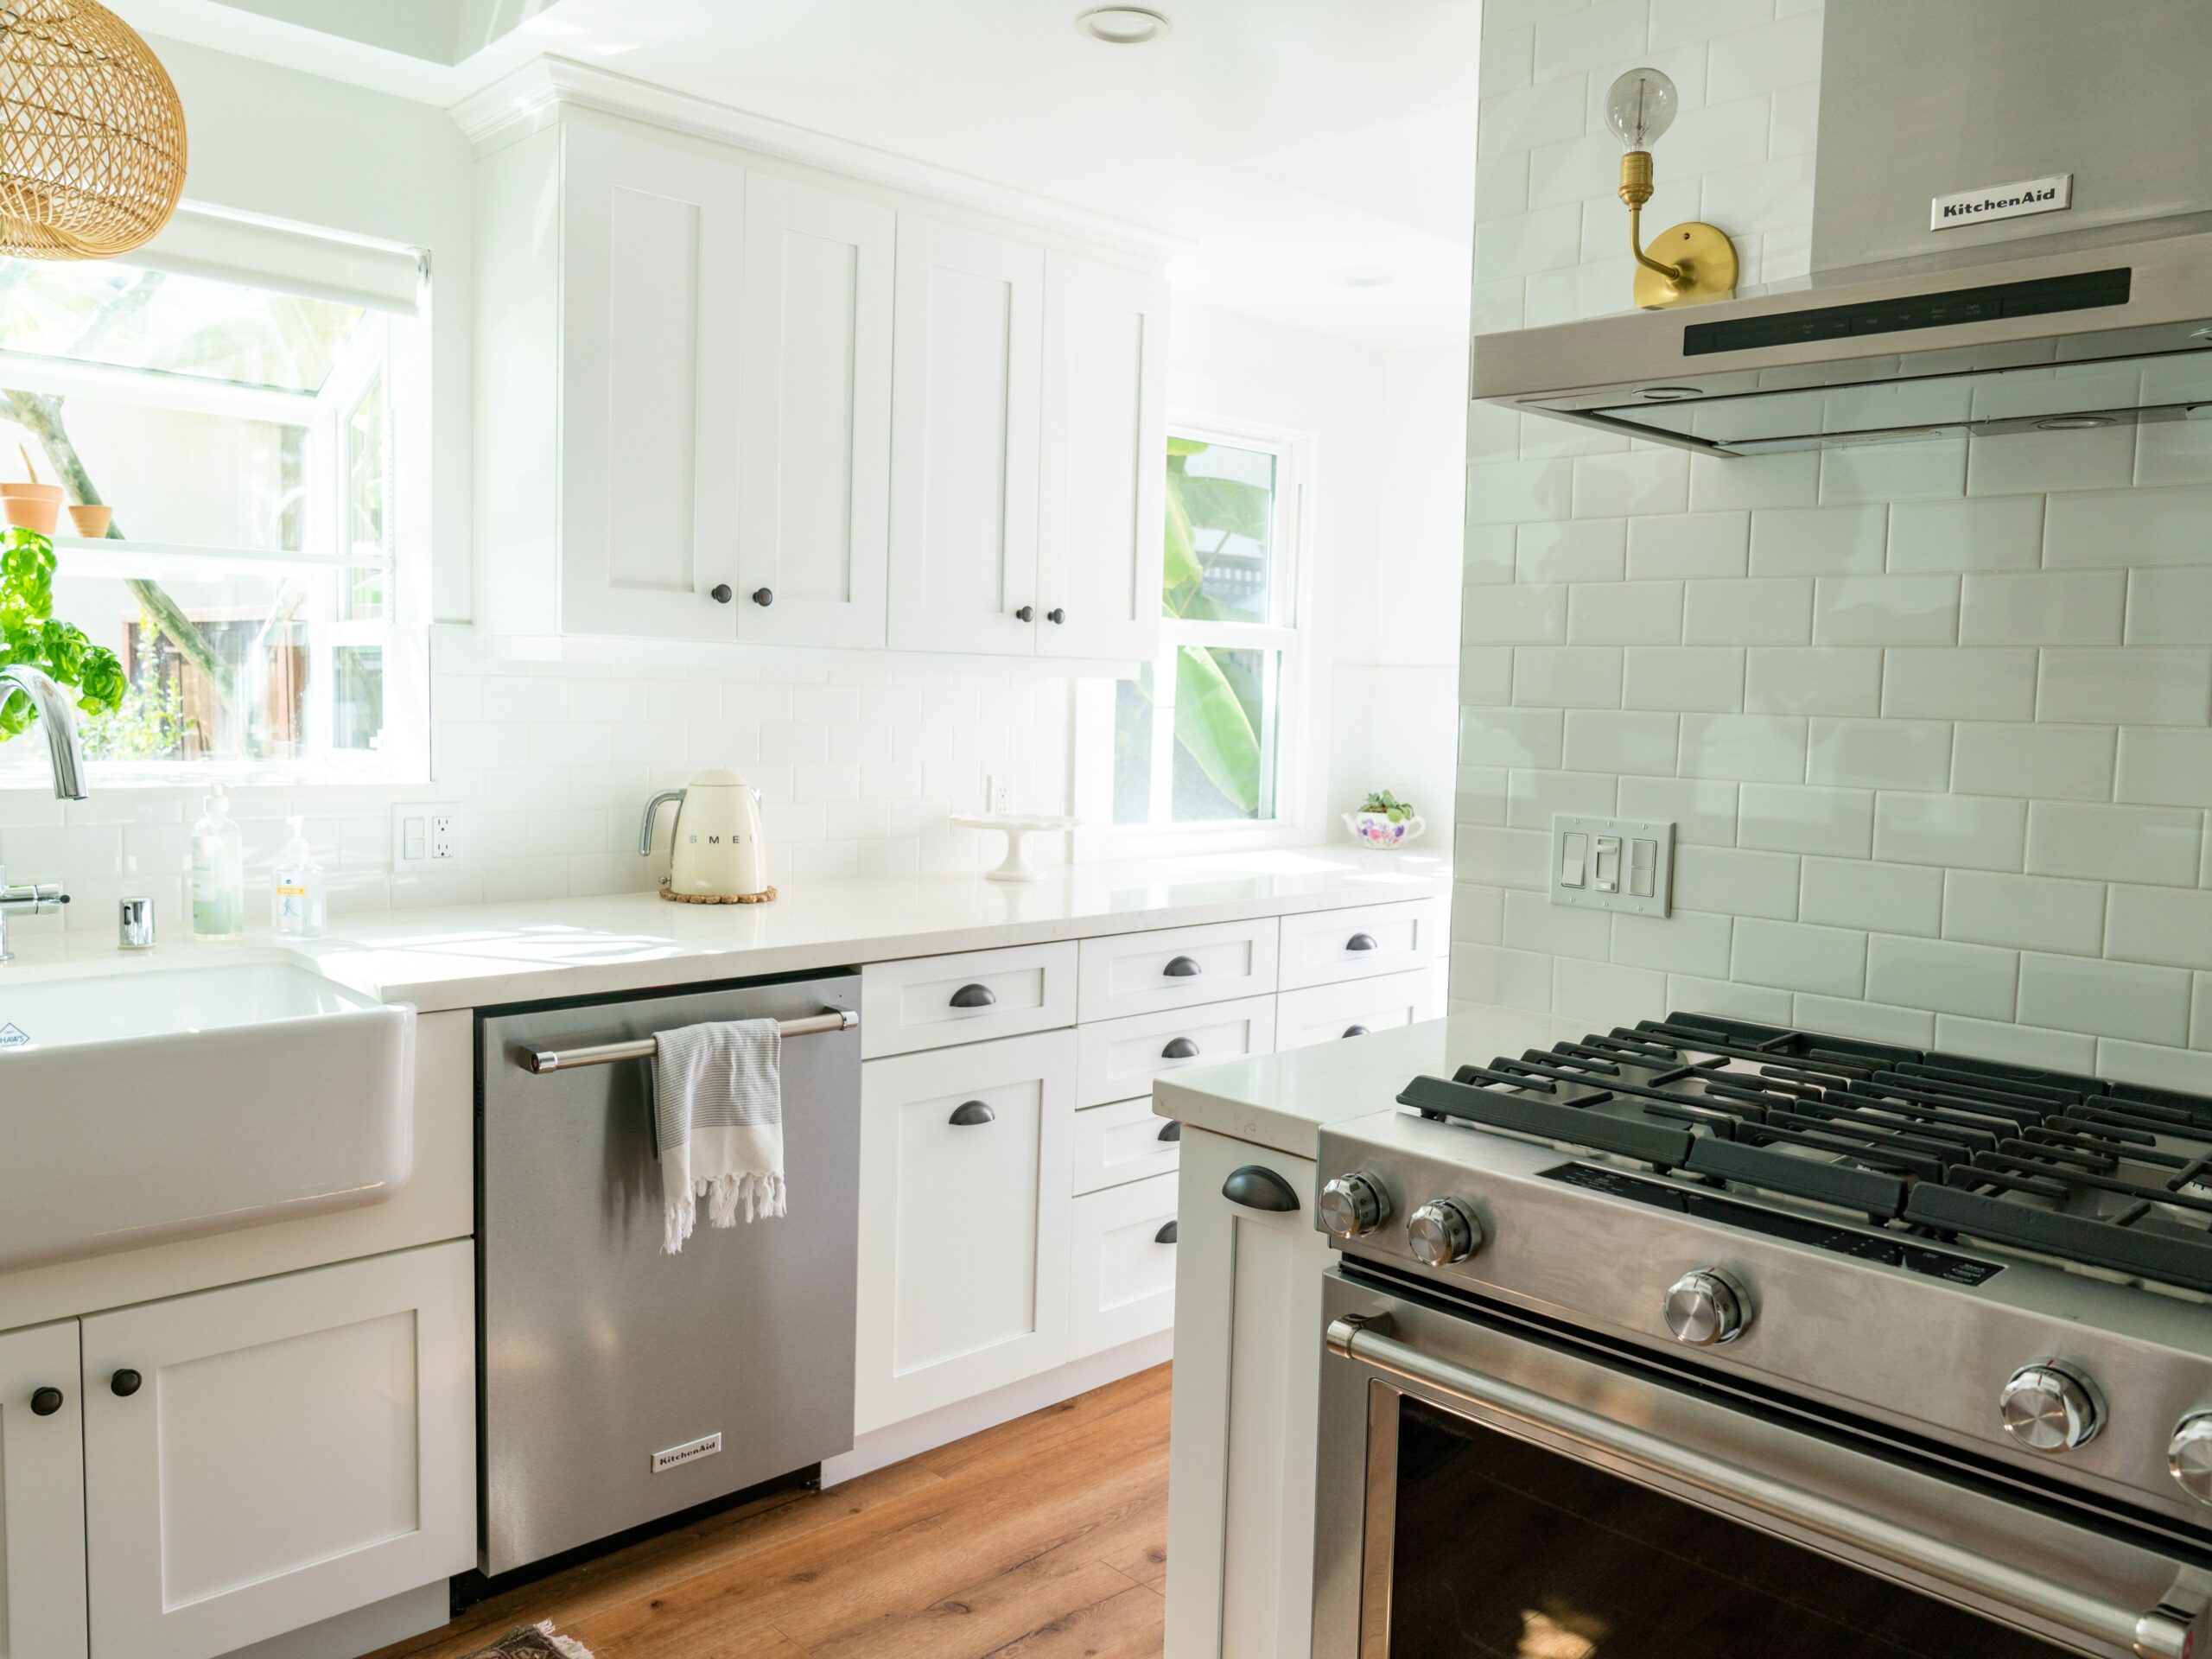 Painting Strategies That Make a Small Kitchen Look Larger - what color to paint a small kitchen to make it look bigger?